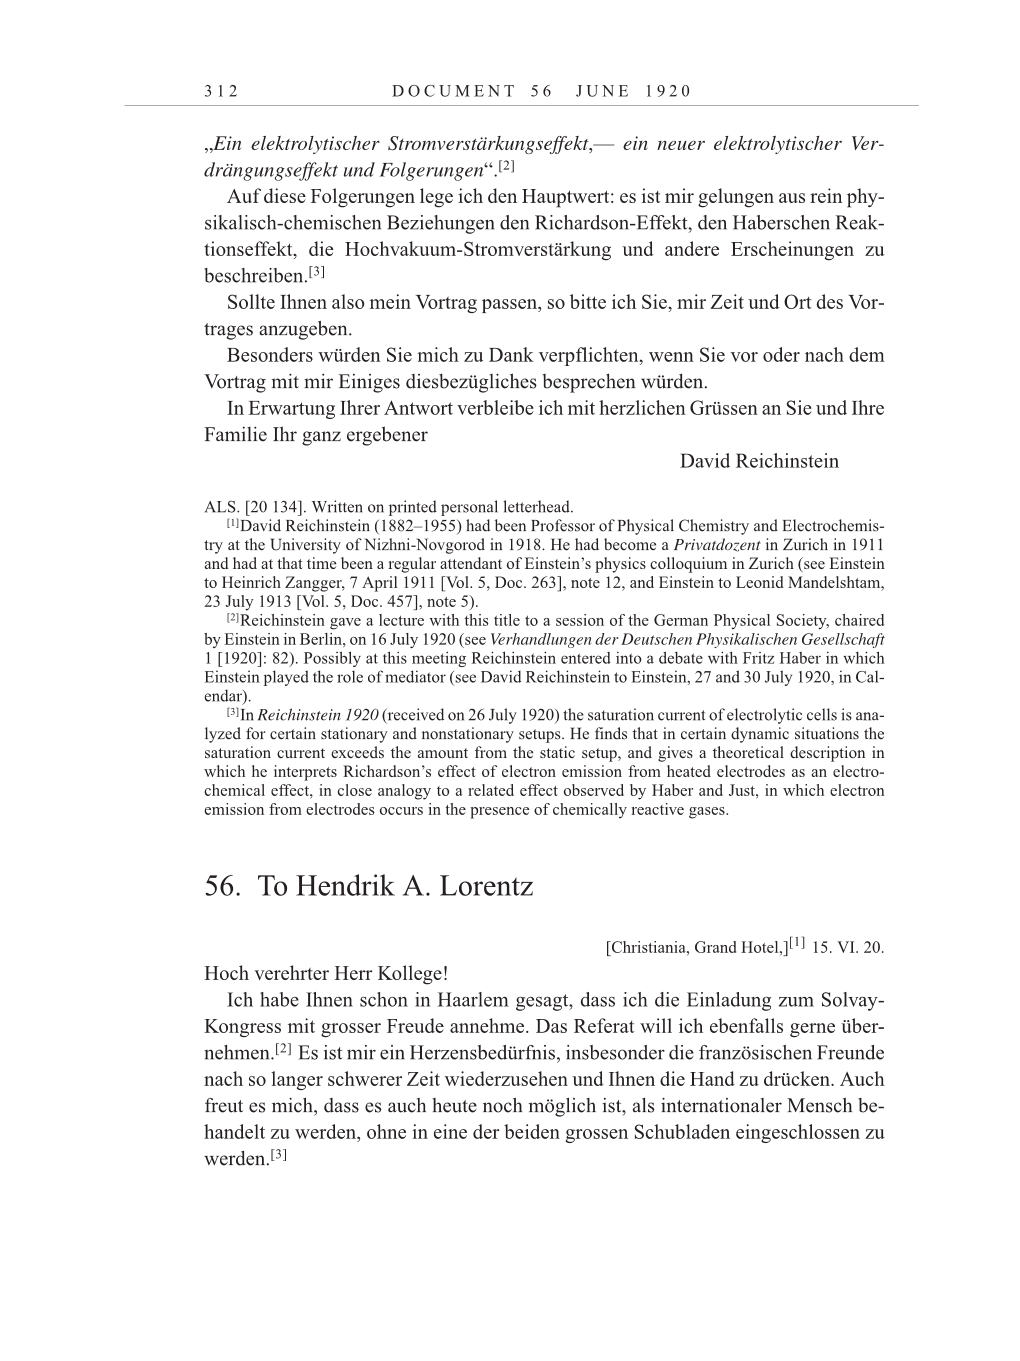 Volume 10: The Berlin Years: Correspondence May-December 1920 / Supplementary Correspondence 1909-1920 page 312